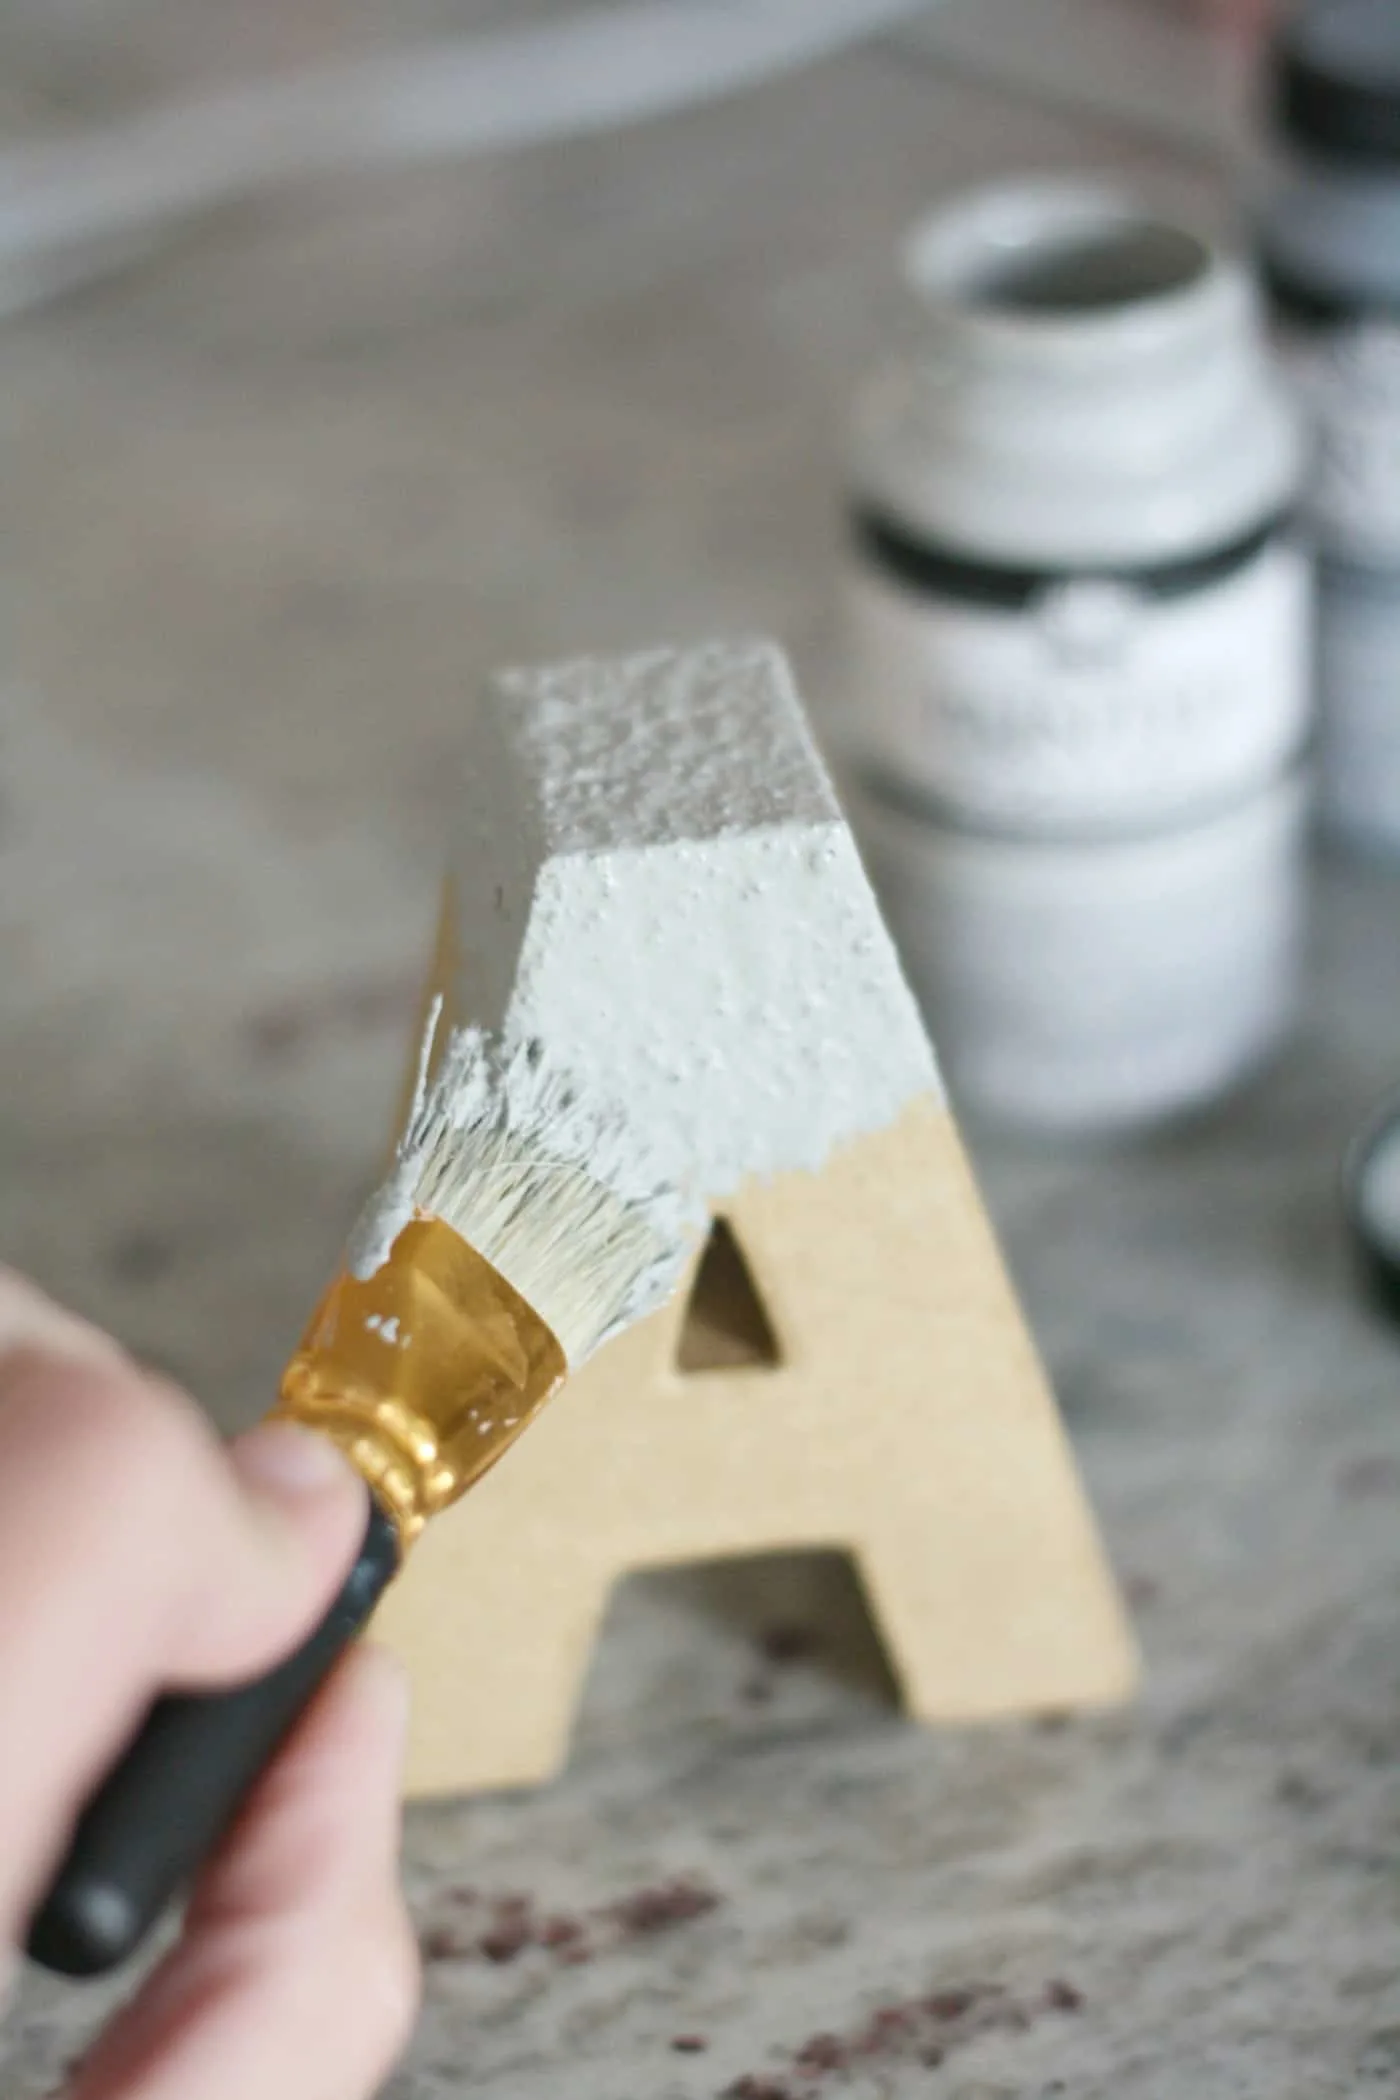 Applying the concrete finish to the paper mache letter